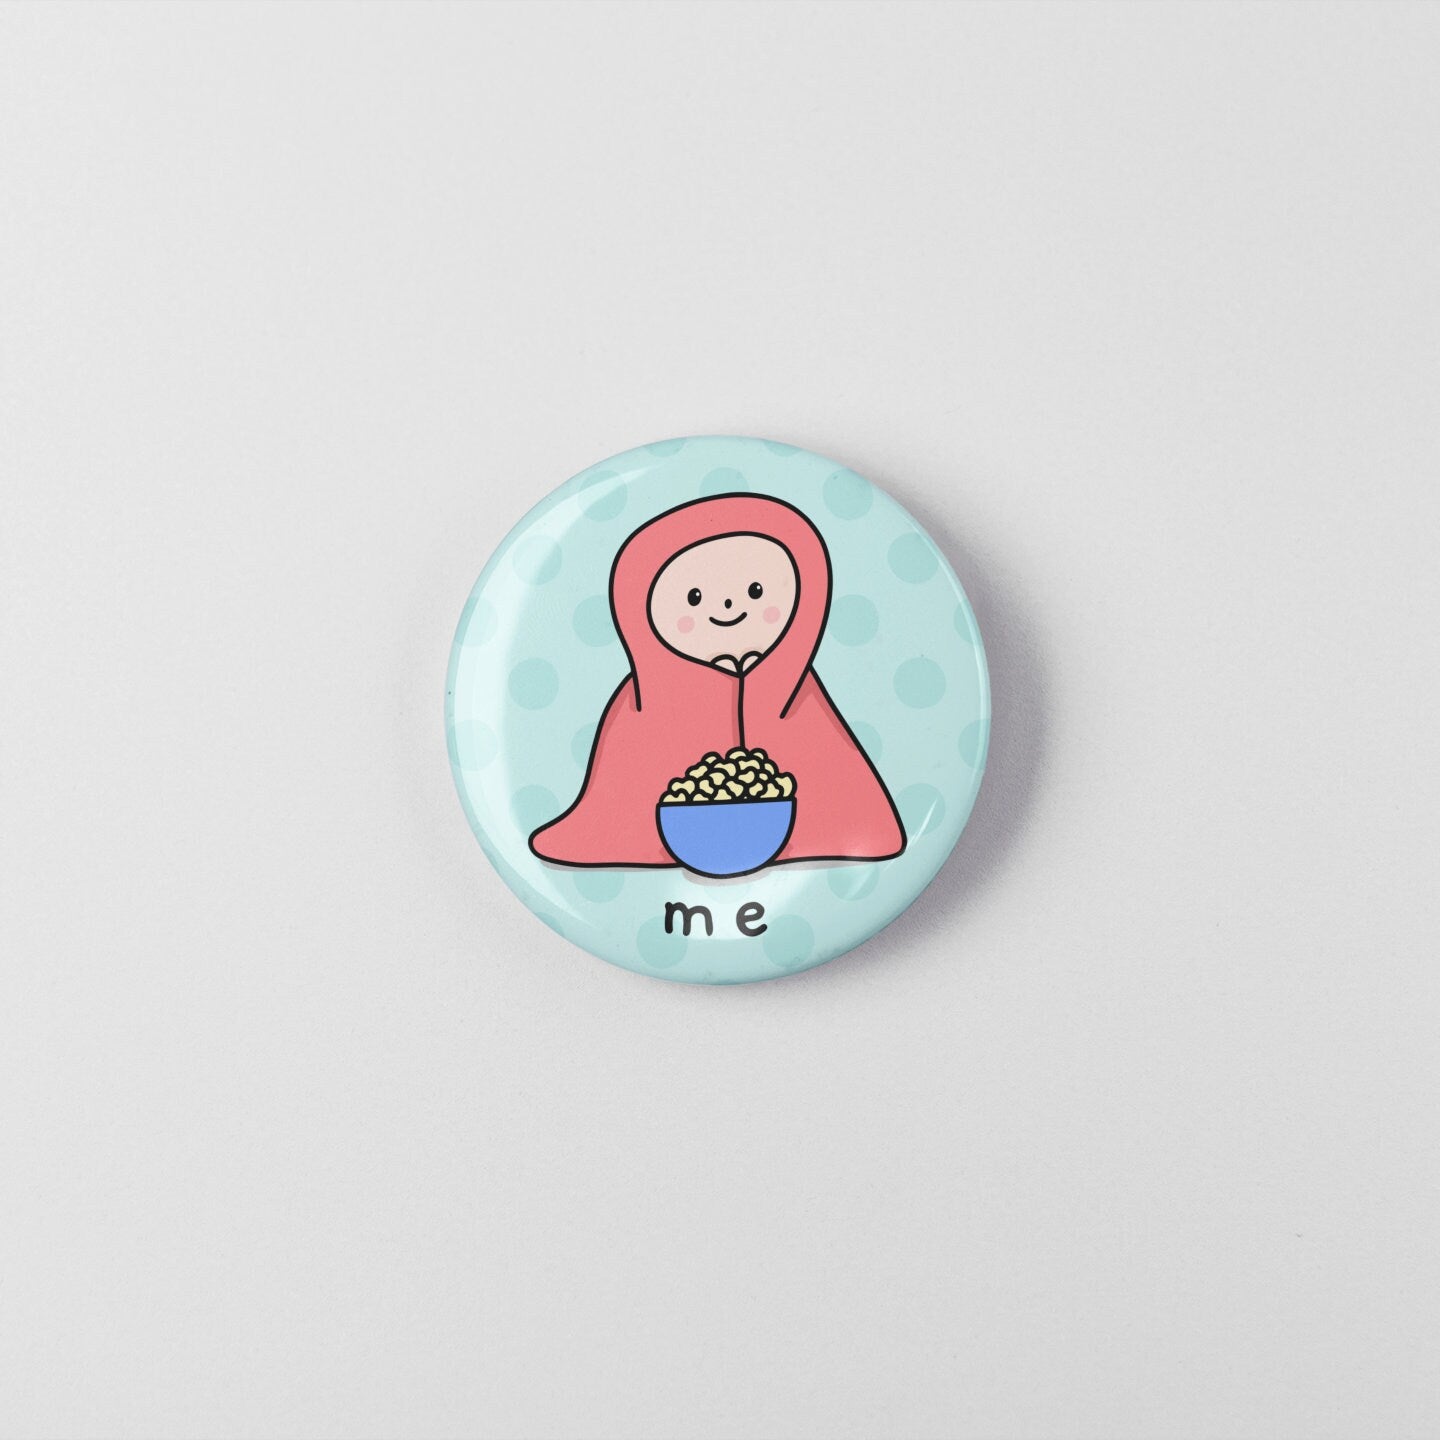 Me Popcorn - Pin Badge | Cute Pins - Popcorn - Unique Gifts - Small Gift - For Friends